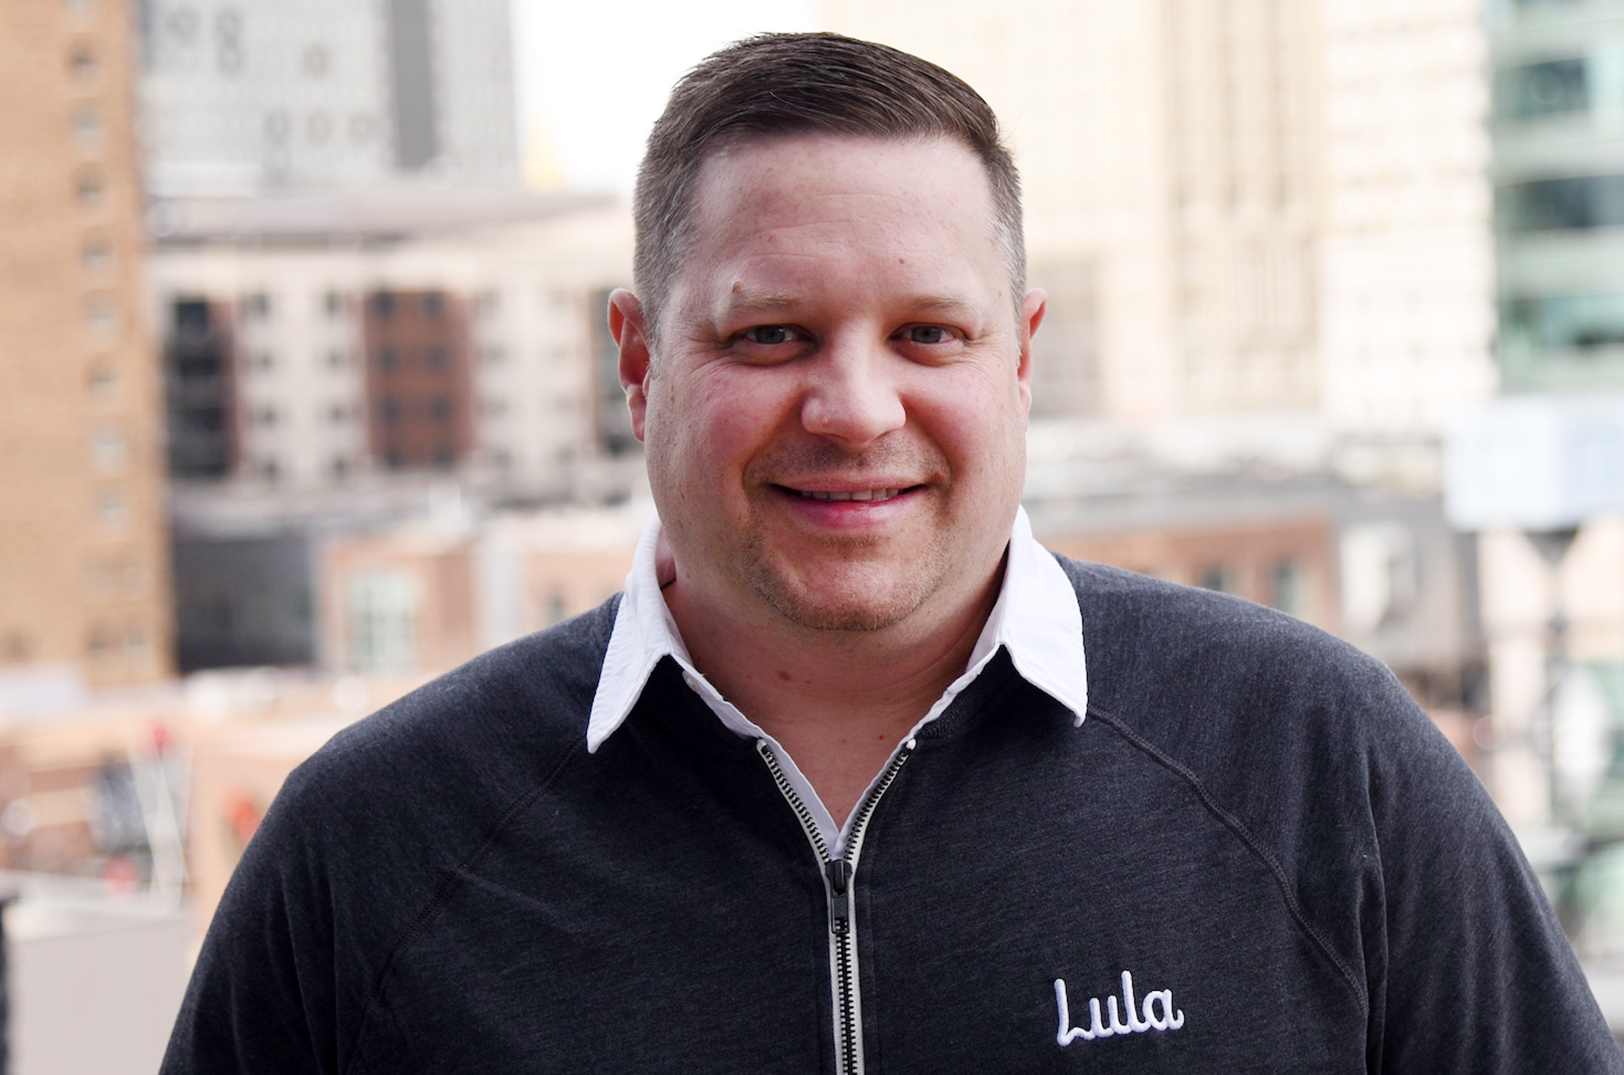 Lula posts $3M round from single VC investor as proptech startup rapidly scales